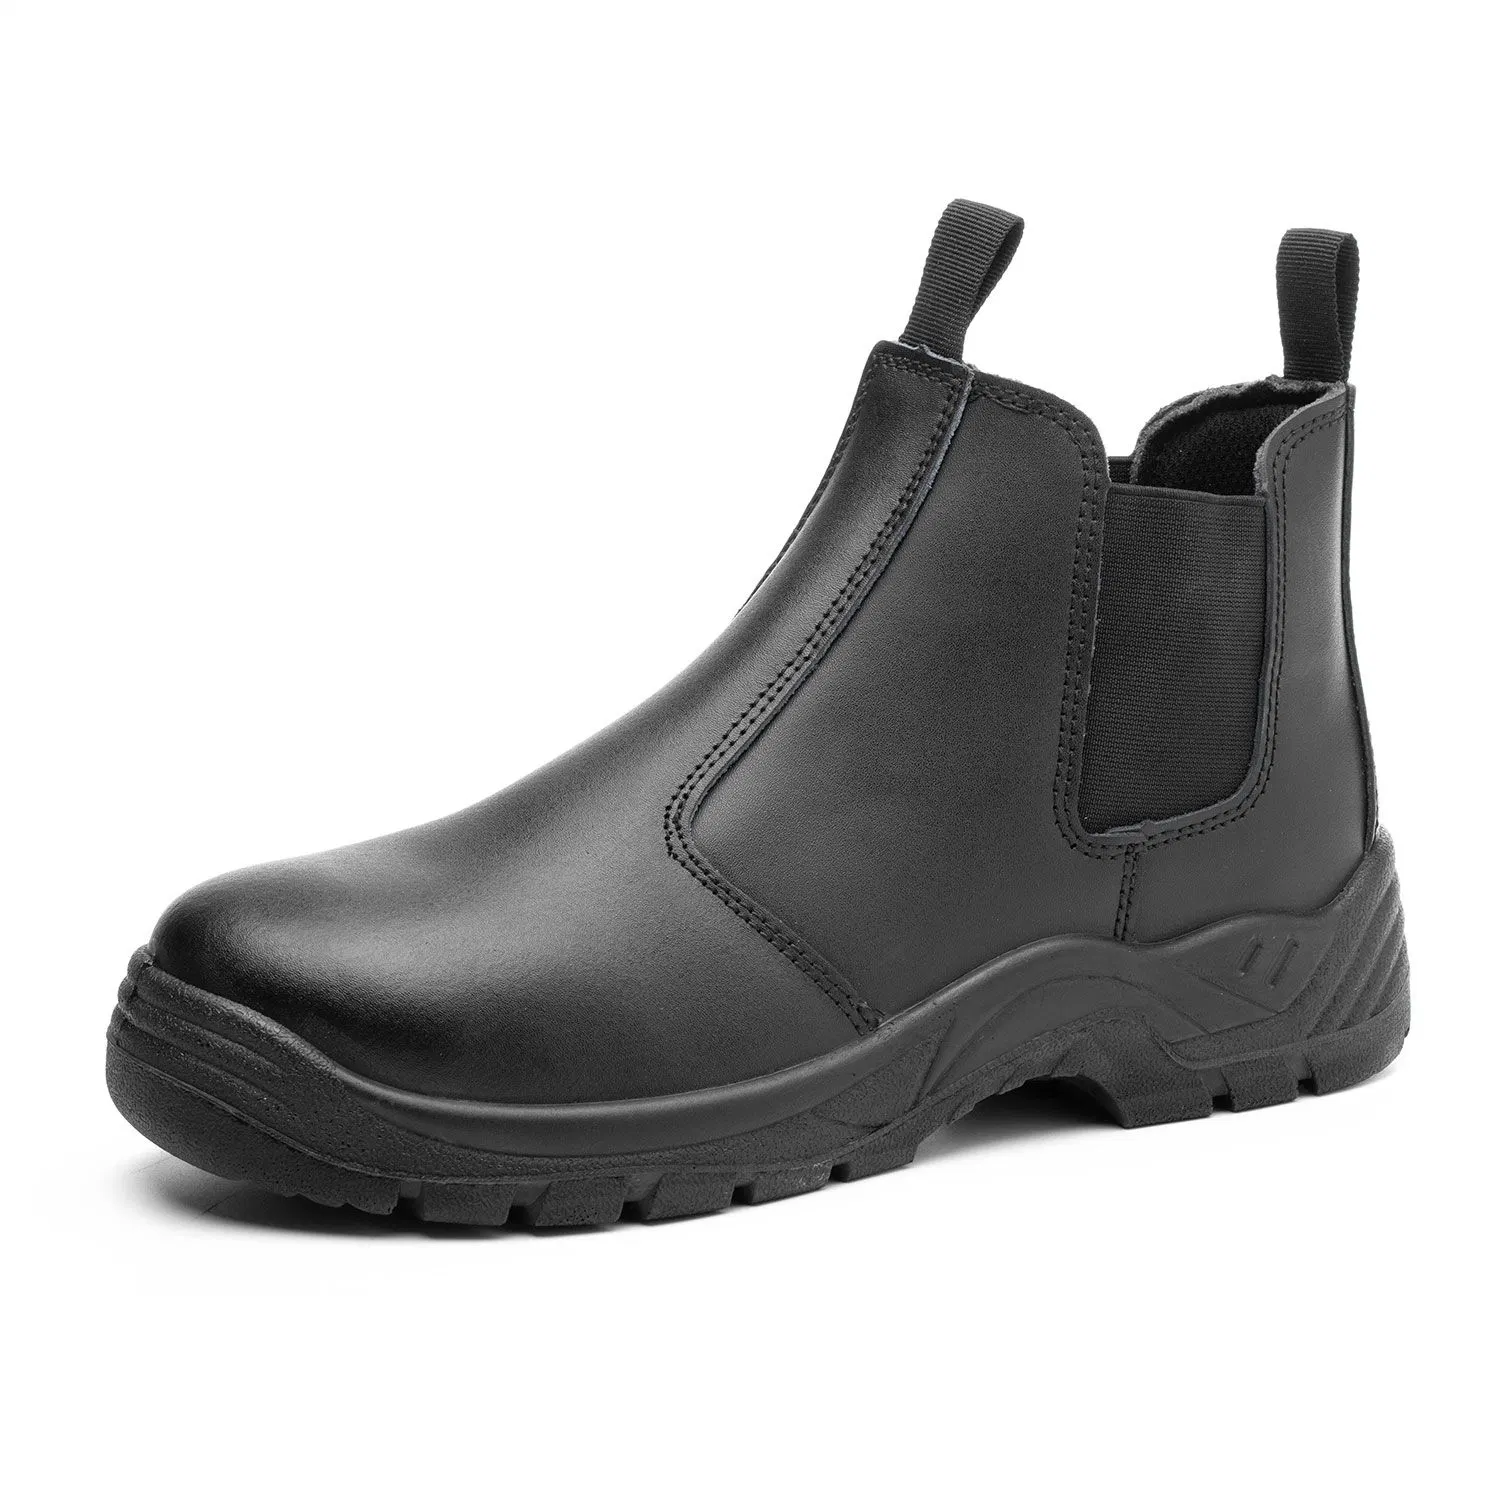 Chelsea Leather Work Safety Boots Shoes for Men with Steel Toe Cap